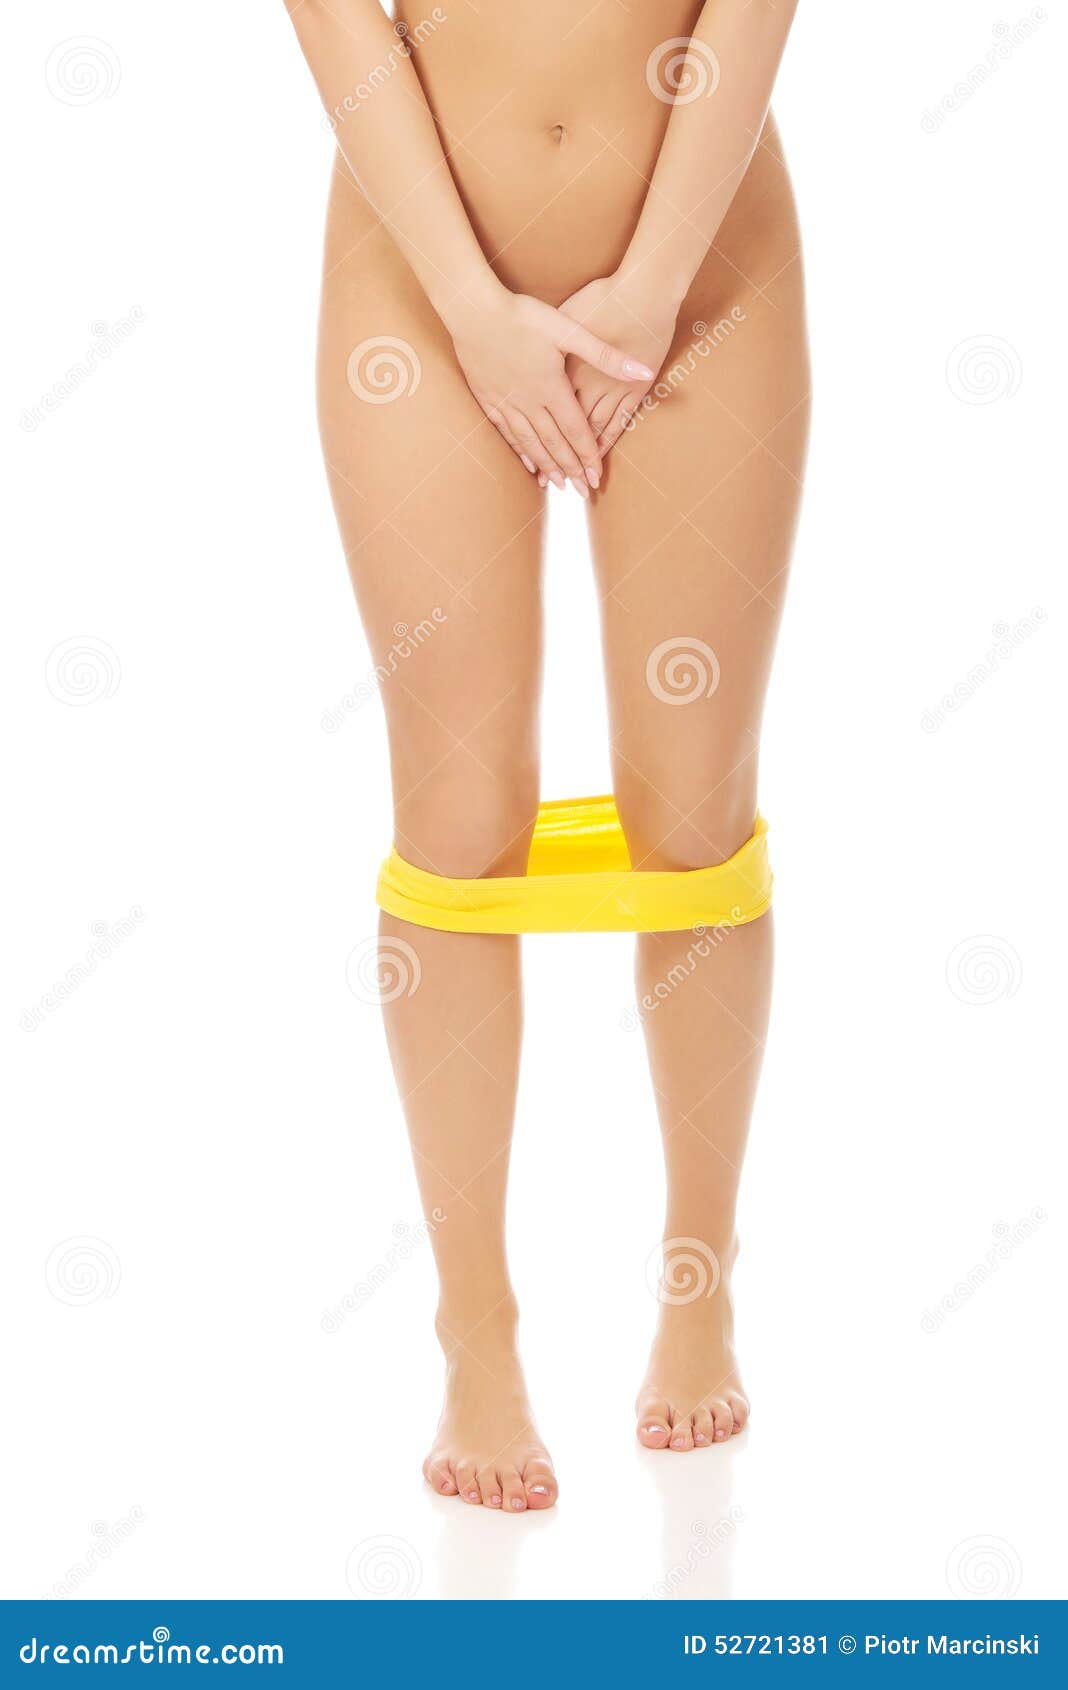 Undressed Woman Holding Her Crotch. Stock Image - Image of pain, intimate:  52721381